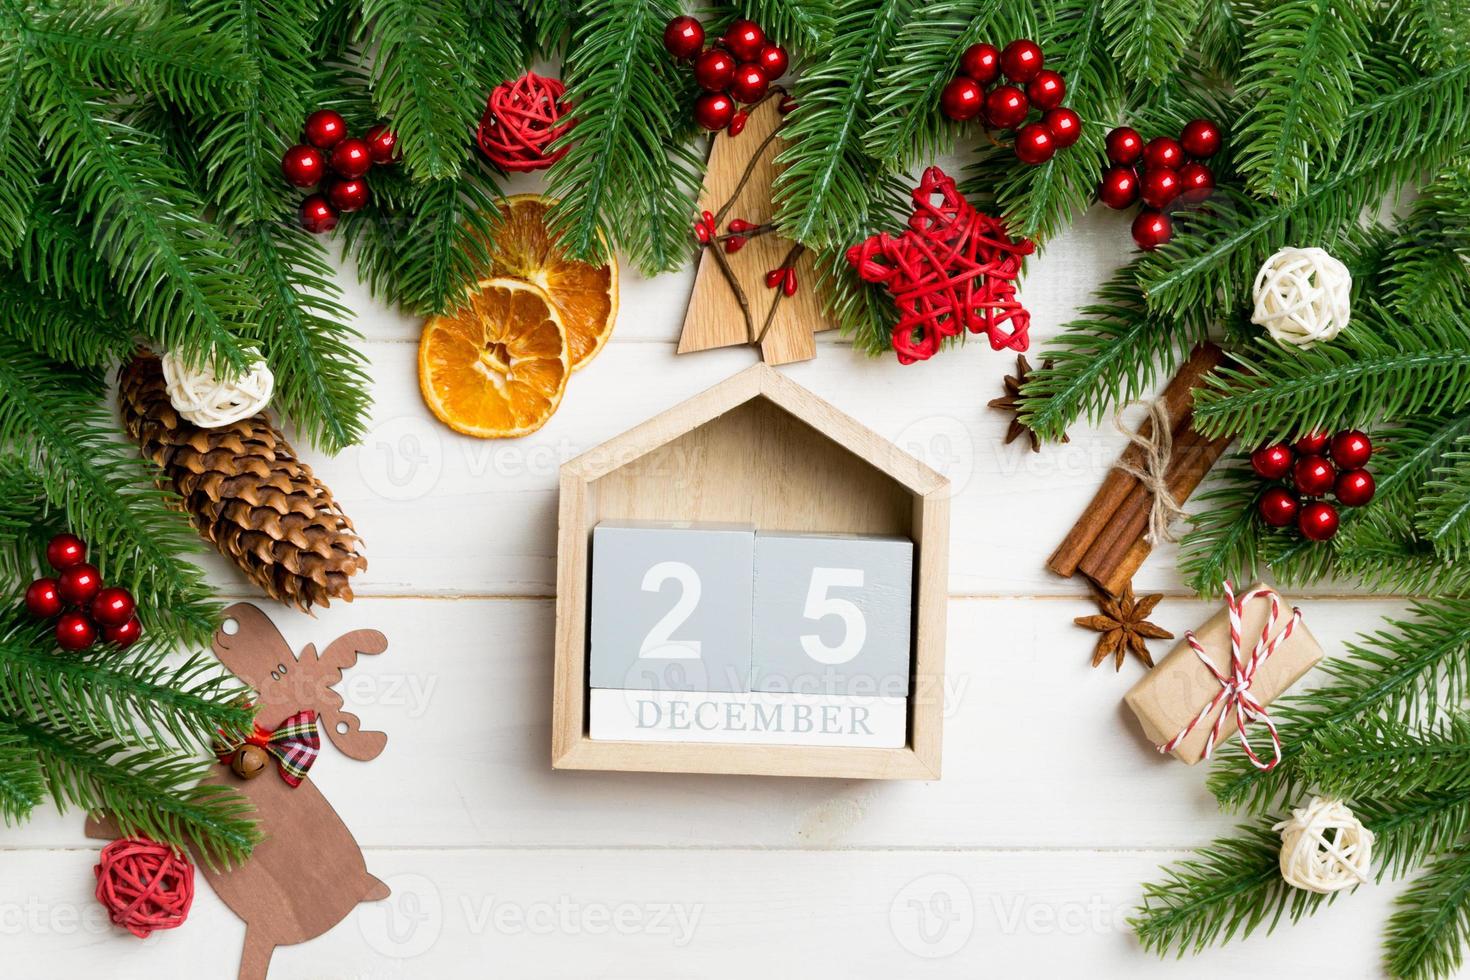 Top view of fir tree branches on wooden background. Calendar decorated with festive toys. The twenty fifth of December. Christmas time concept photo